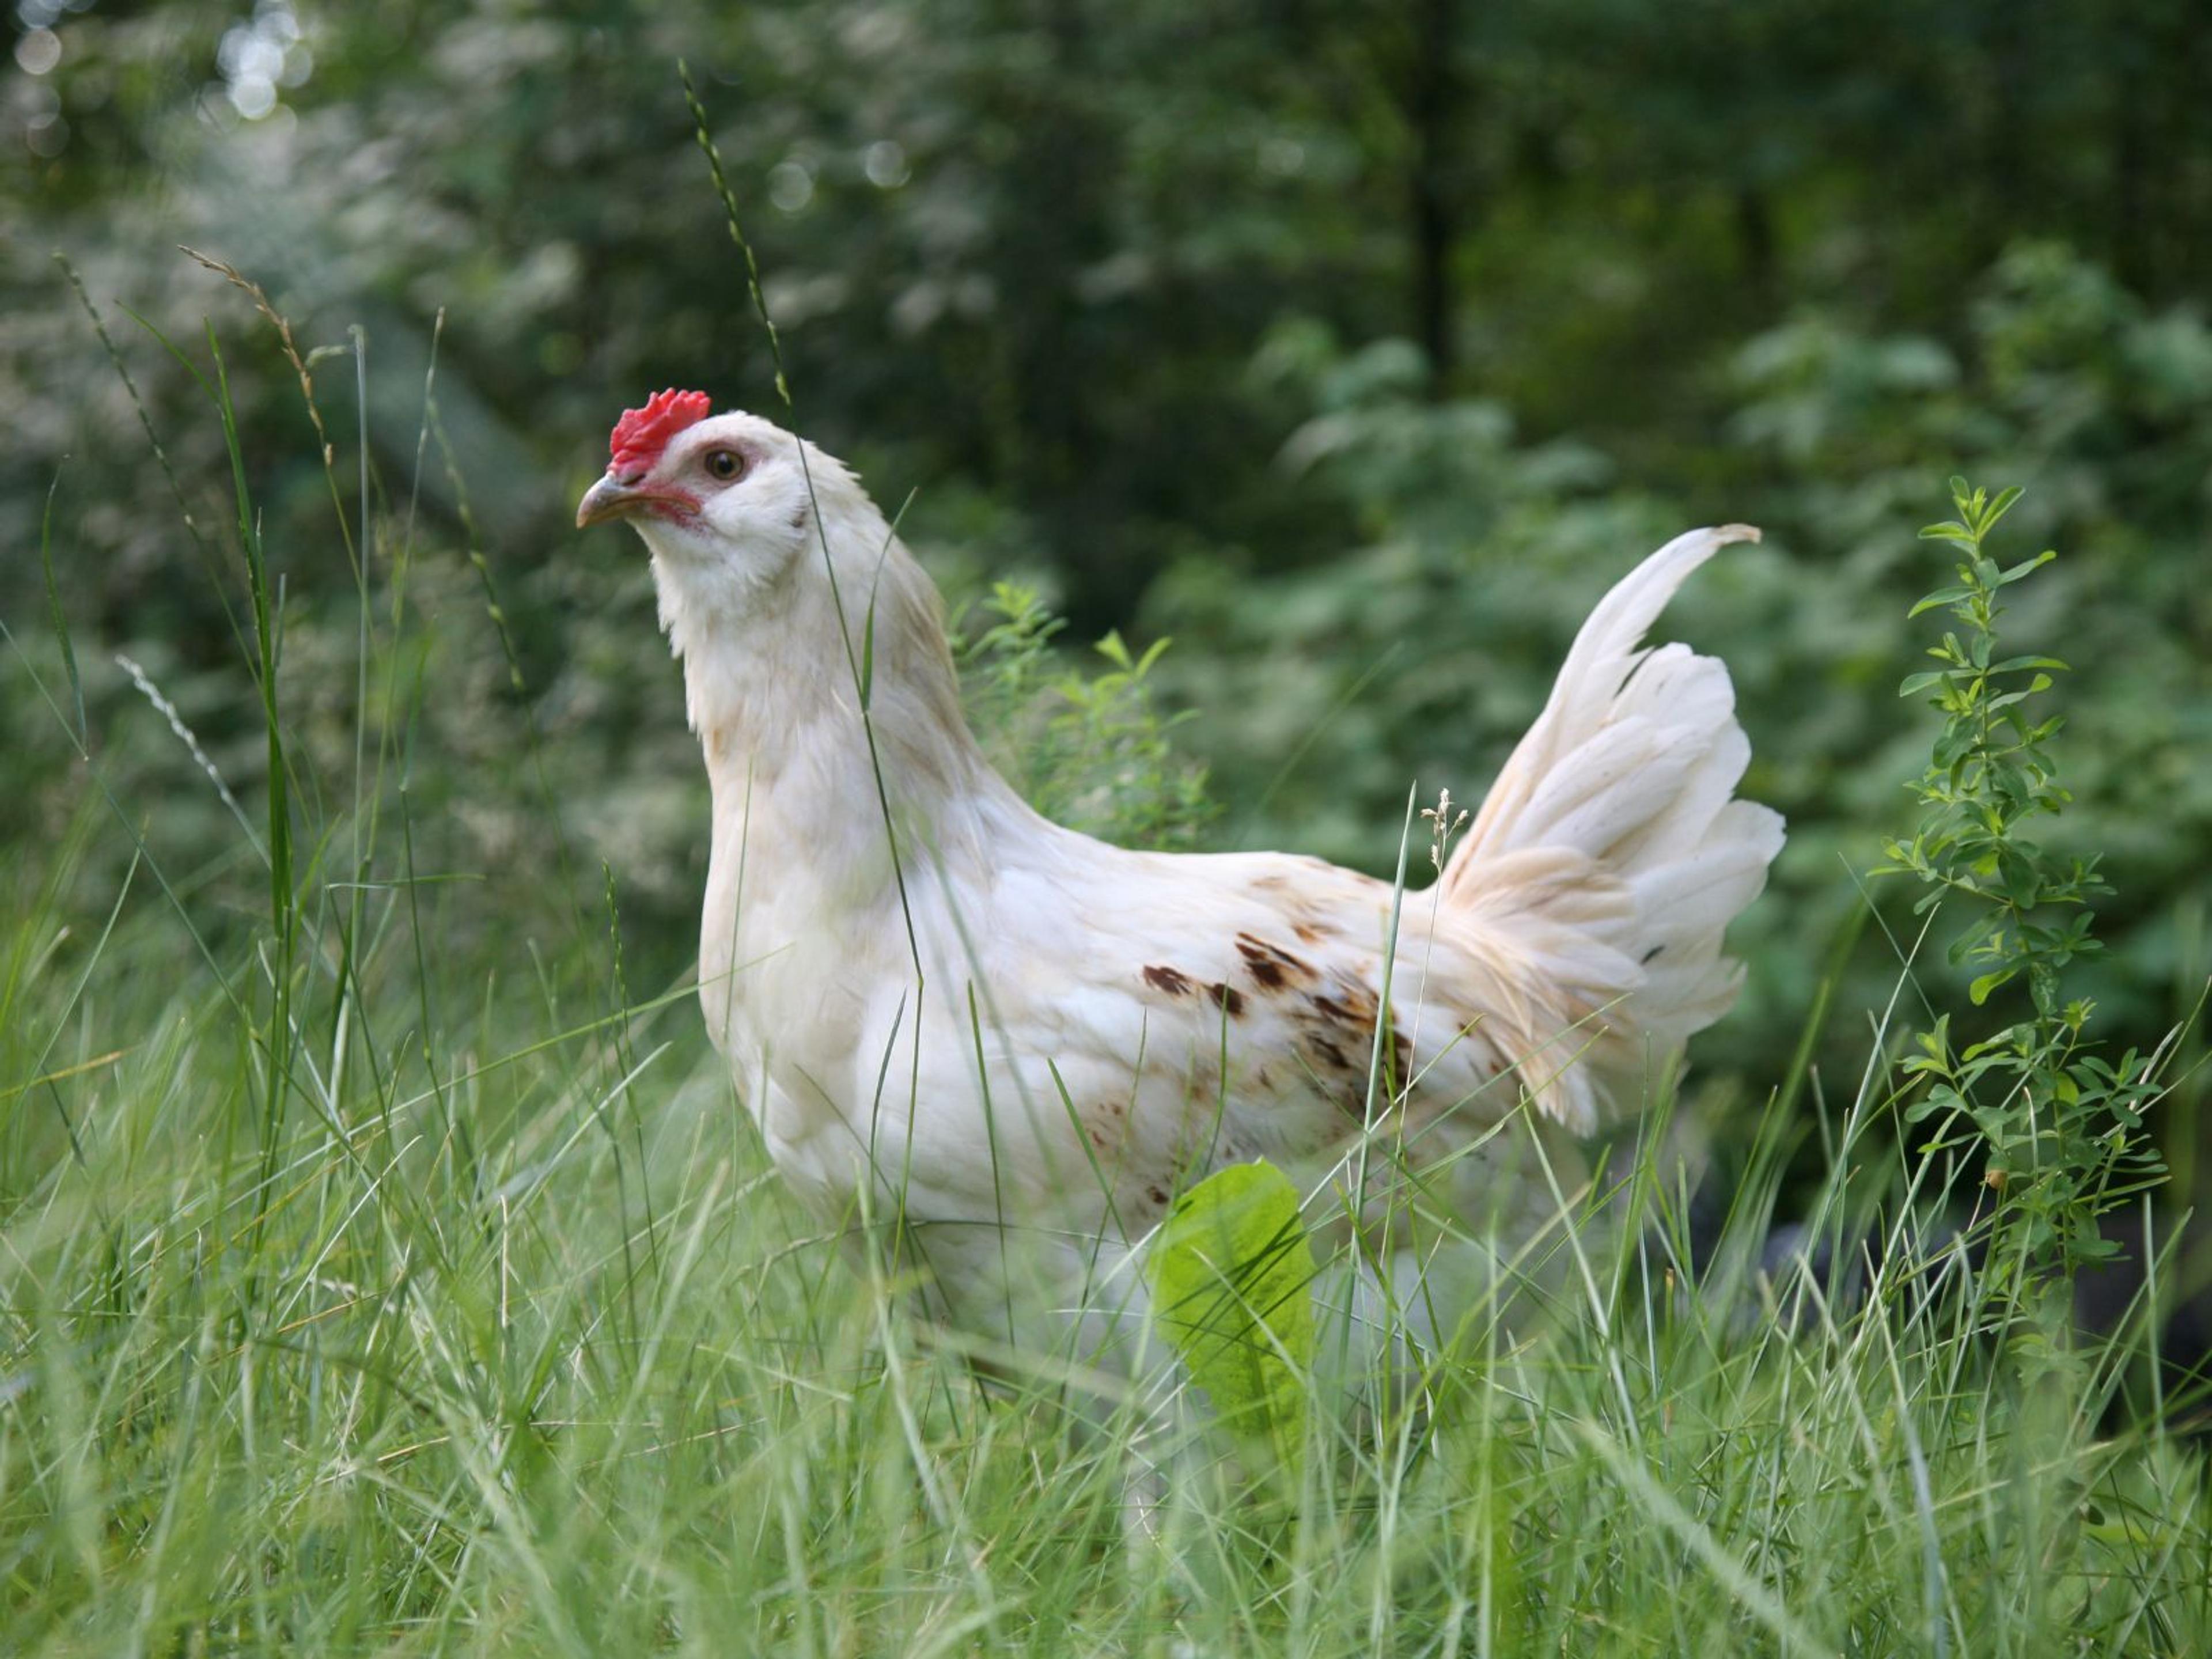 A white chicken out and about in a green area.